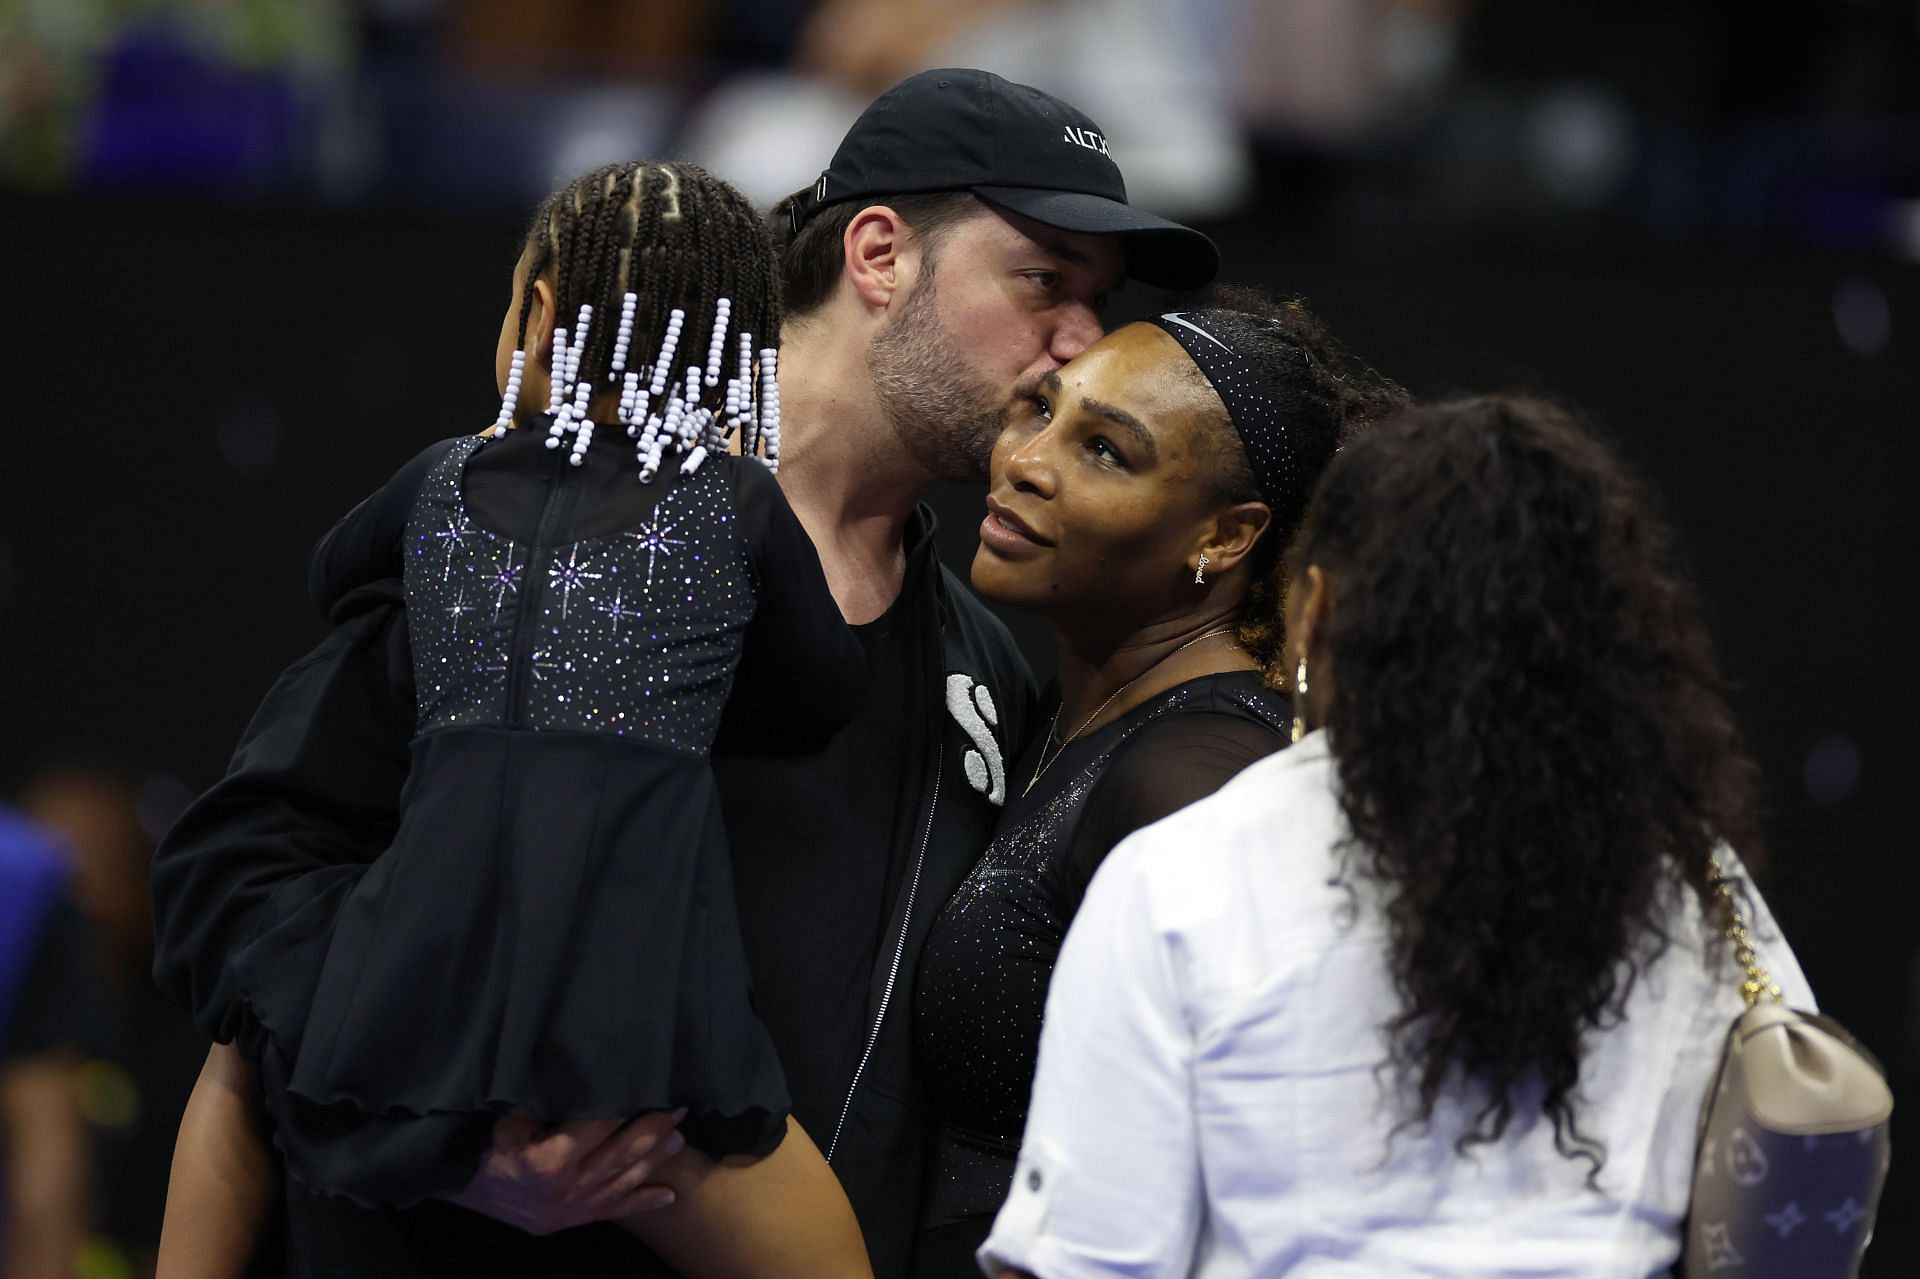 Serena Williams and her husband Alexis Ohanian at the 2022 US Open